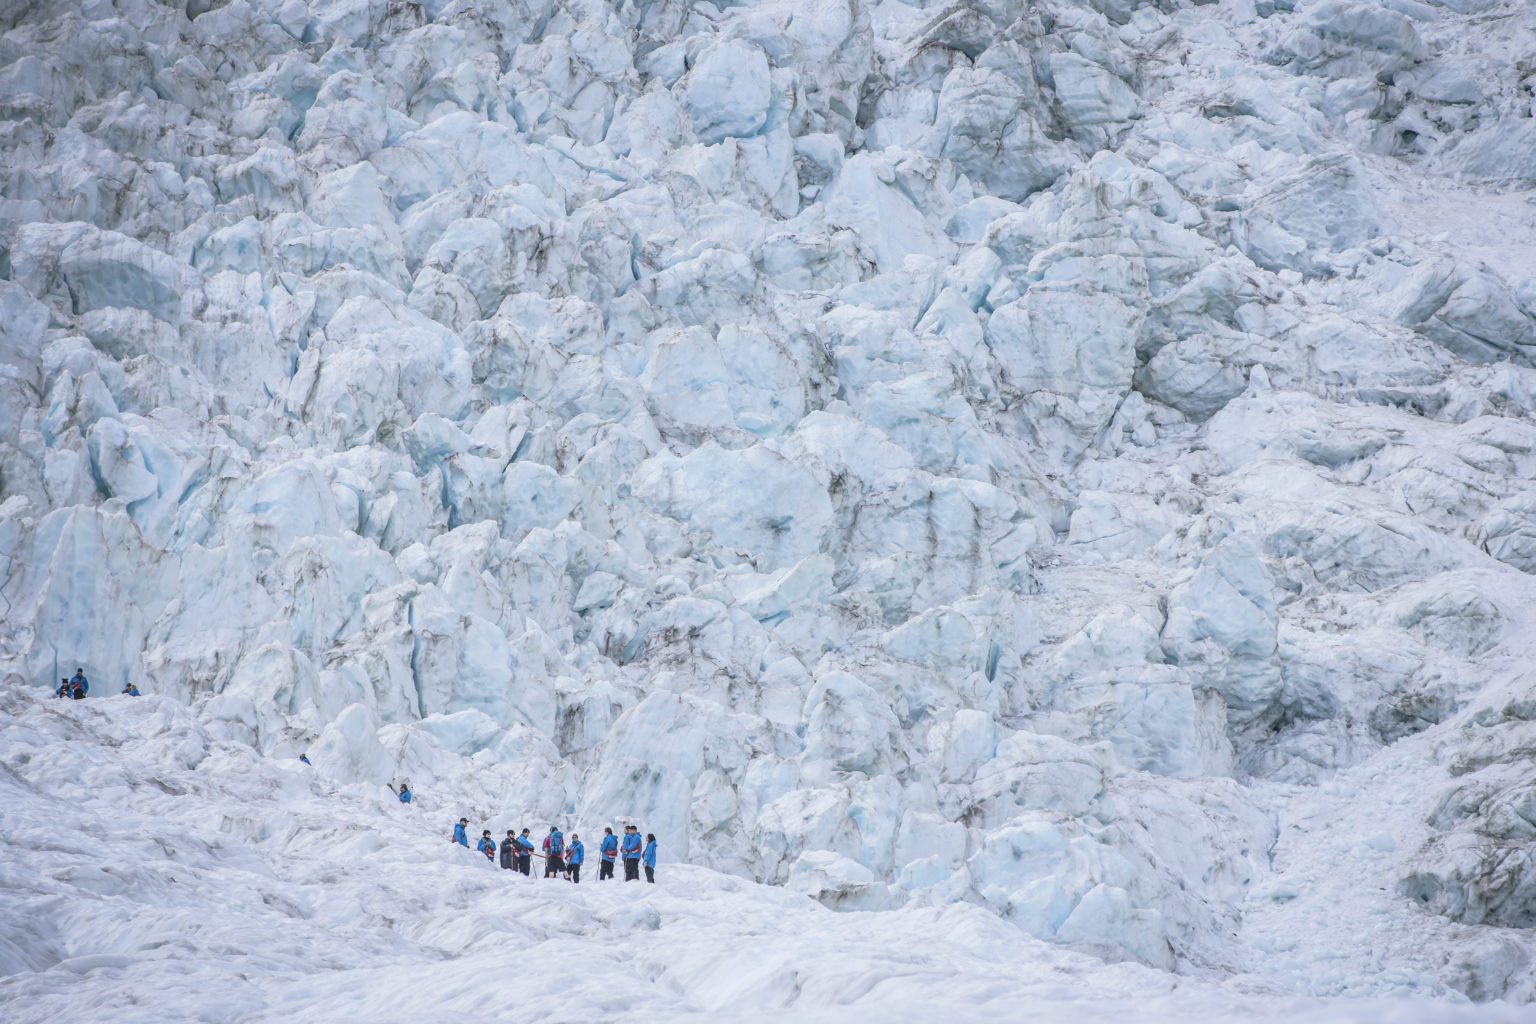 A group of heli-hikers walk in a line on Franz Josef glacier, looking tiny in comparison